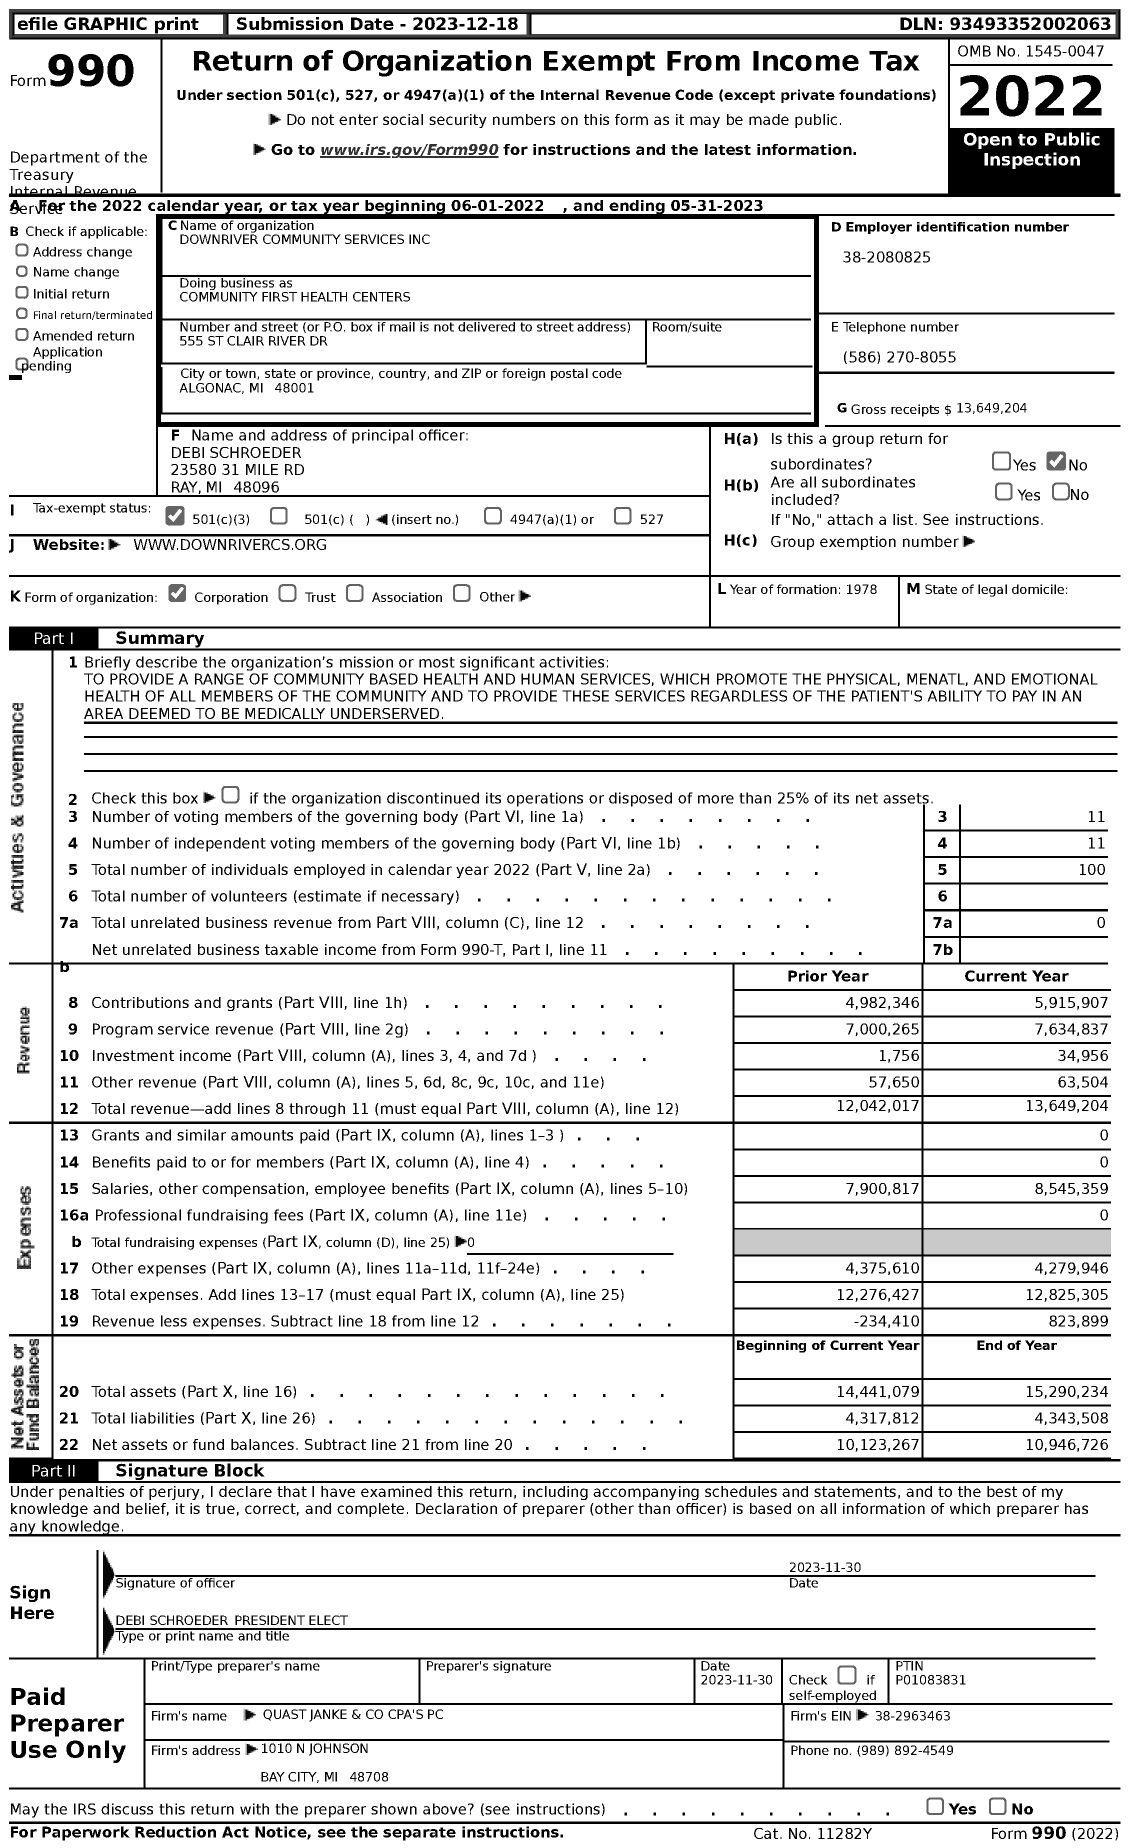 Image of first page of 2022 Form 990 for Community First Health Centers